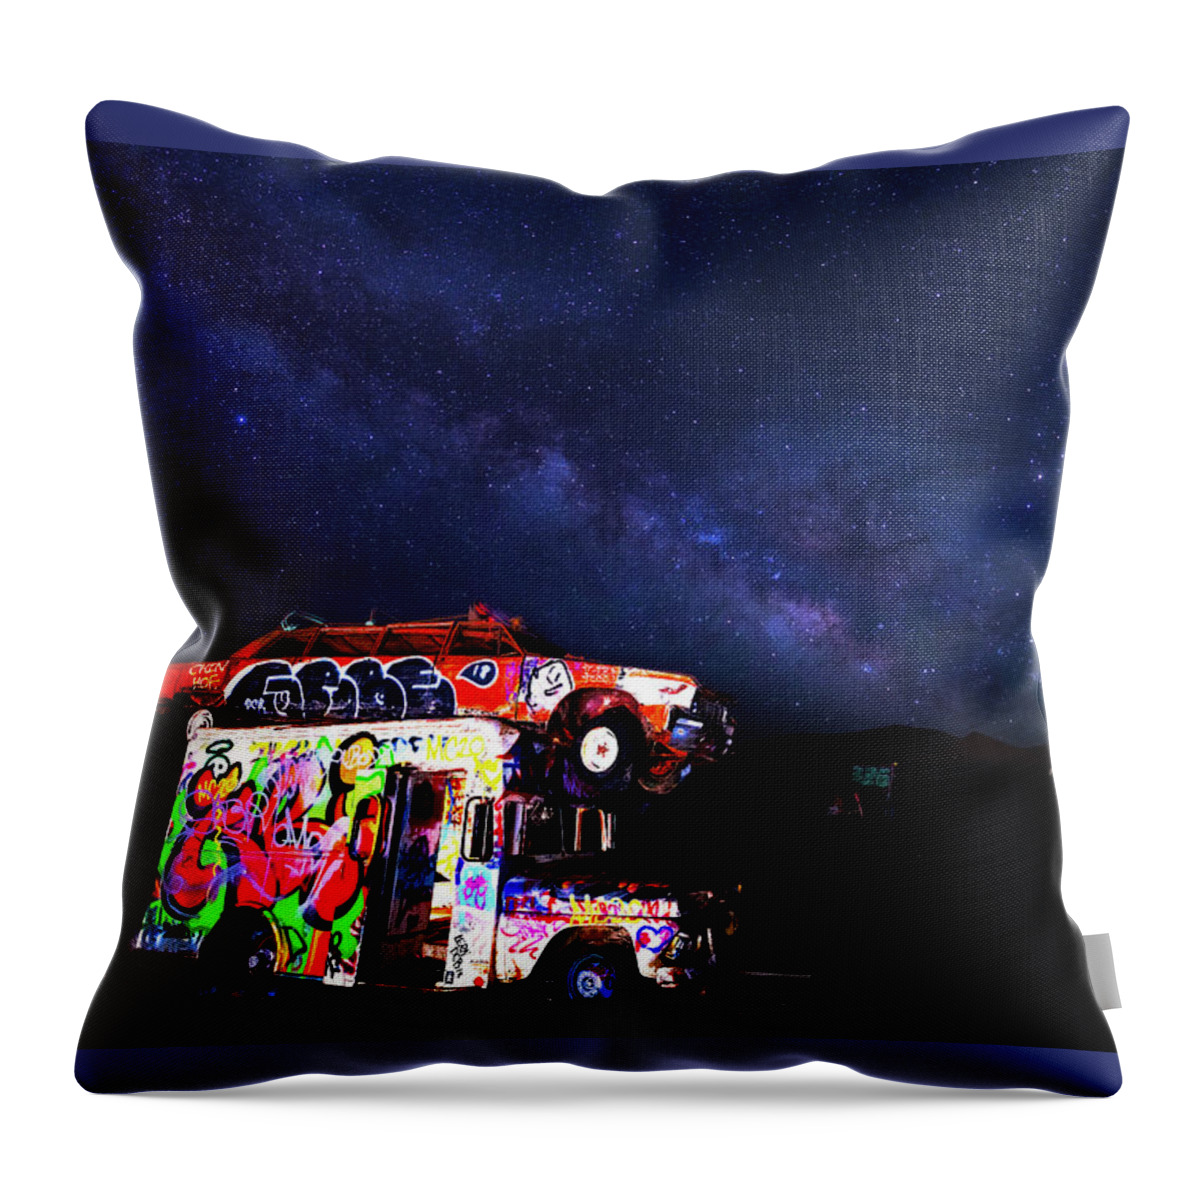 America Throw Pillow featuring the photograph Milky Way Over Mojave Graffiti Art 1 by James Sage